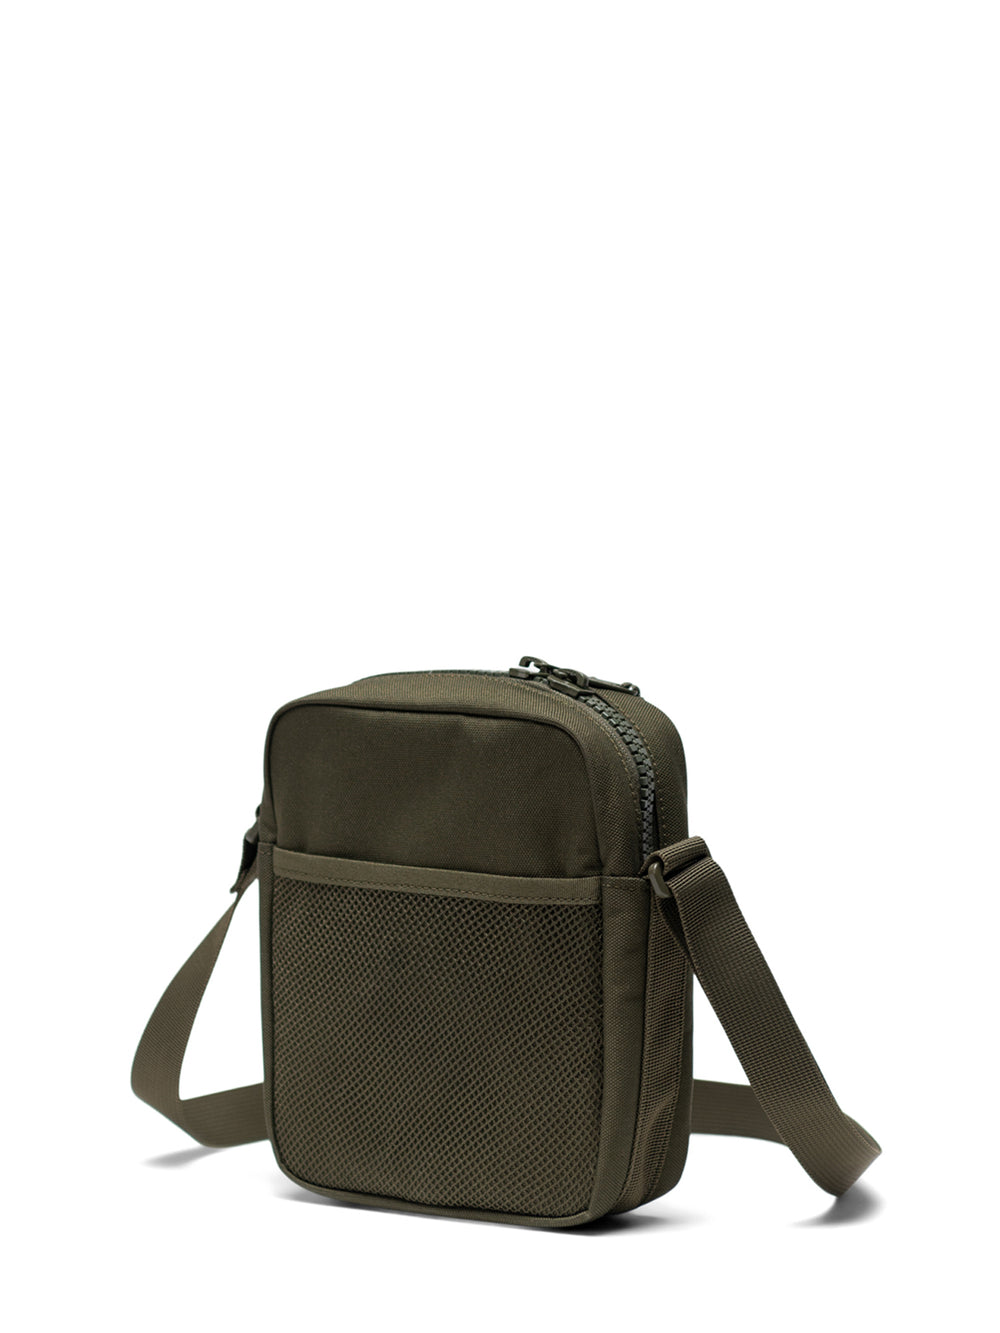 HERSCHEL SUPPLY CO. HERITAGE XBODY - CLEARANCE